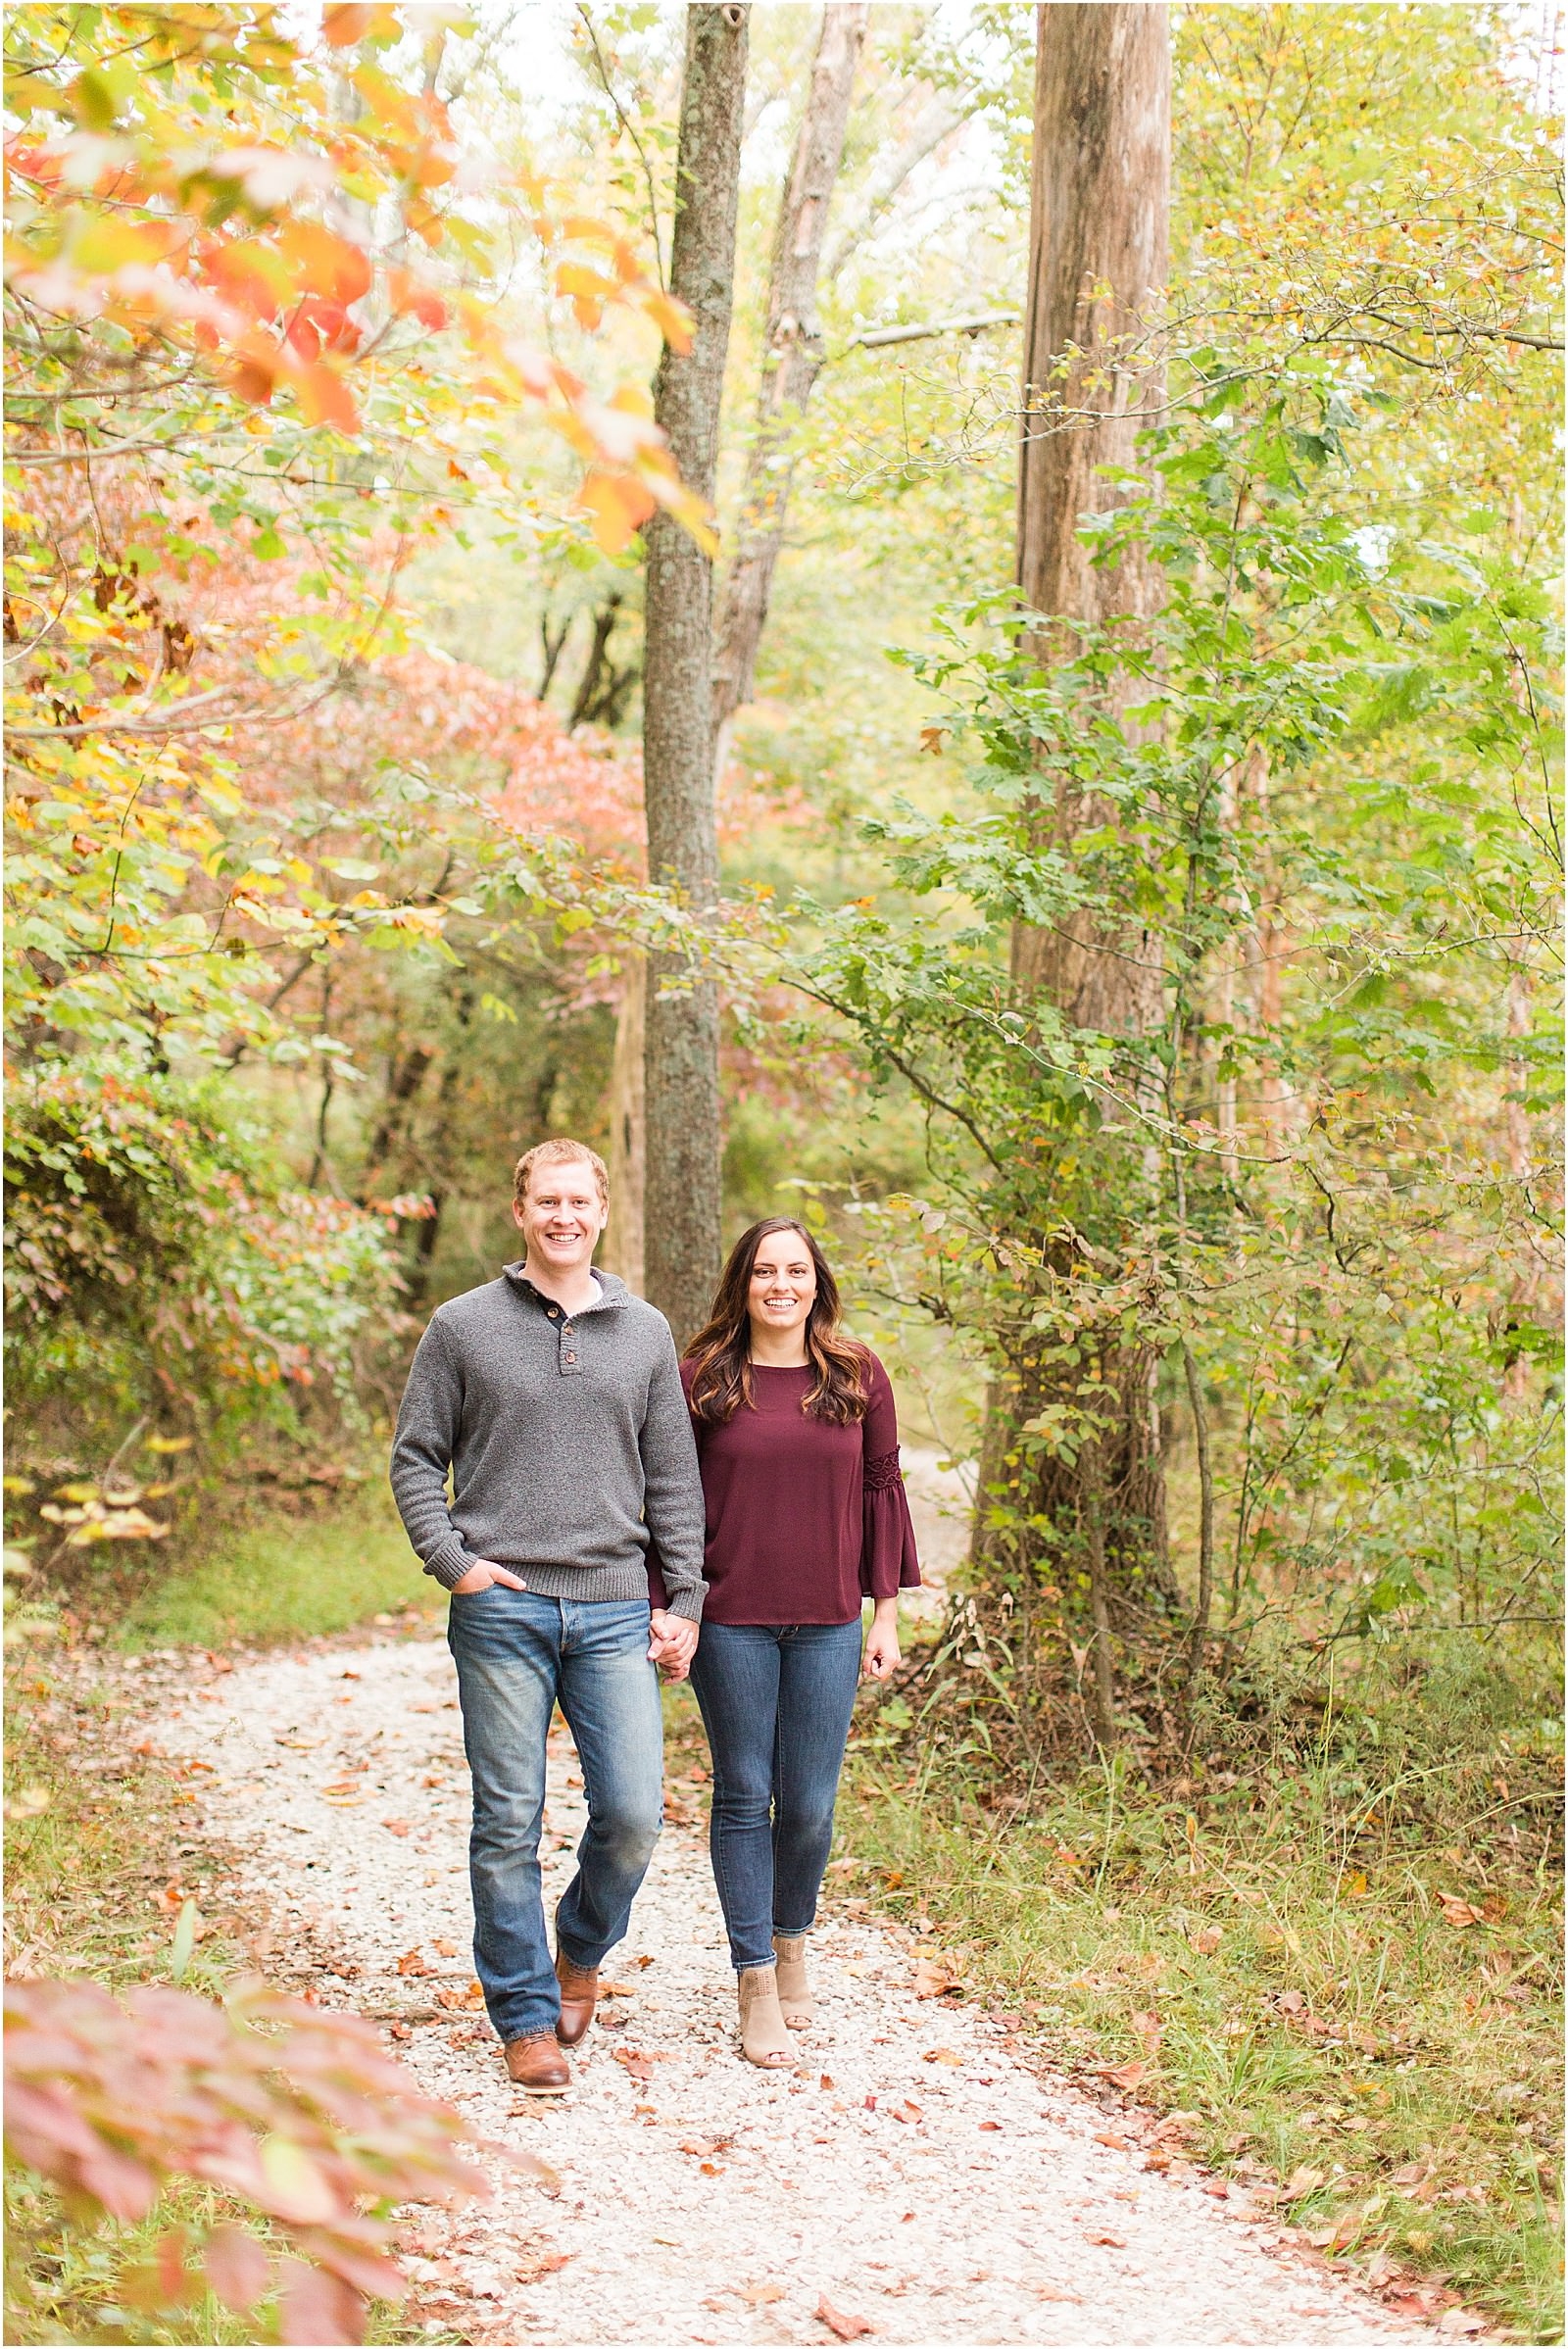 A Lincoln State Park Engagemtent Session | Deidra and Andrew | Bret and Brandie Photography 0020.jpg